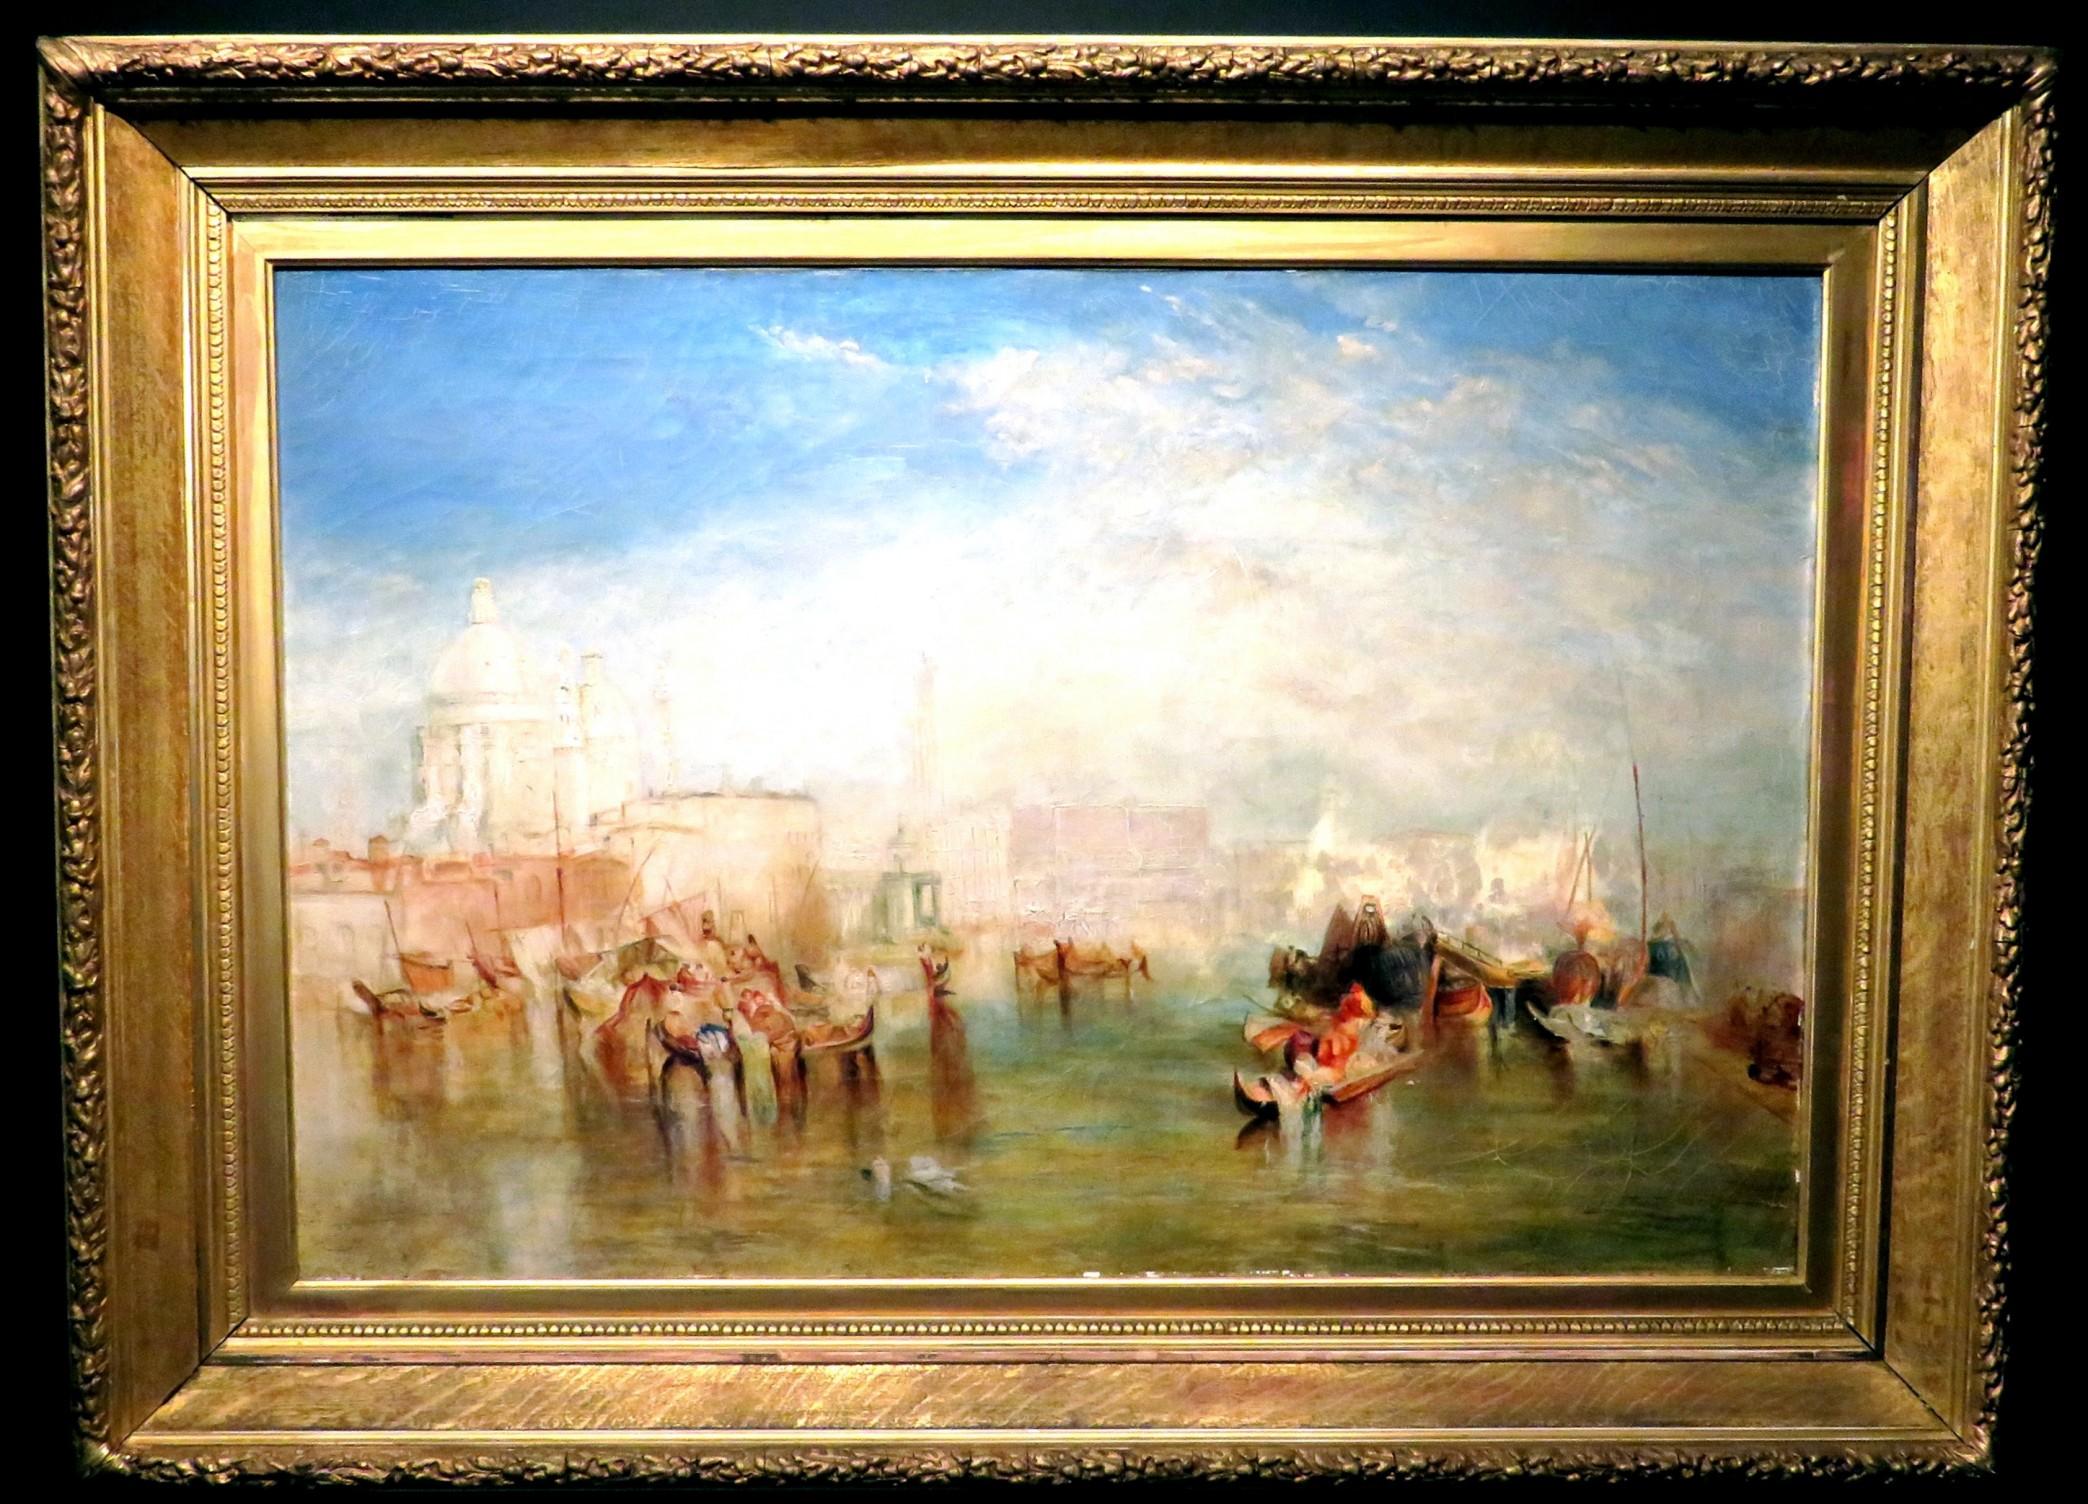 A large & finely executed panoramic view of the Grand Canal, depicting Santa Maria della Salute and The Doges Palace from the Giudecca. 
This sensitively rendered work pays homage to the original painting executed by famed British seascape artist J.